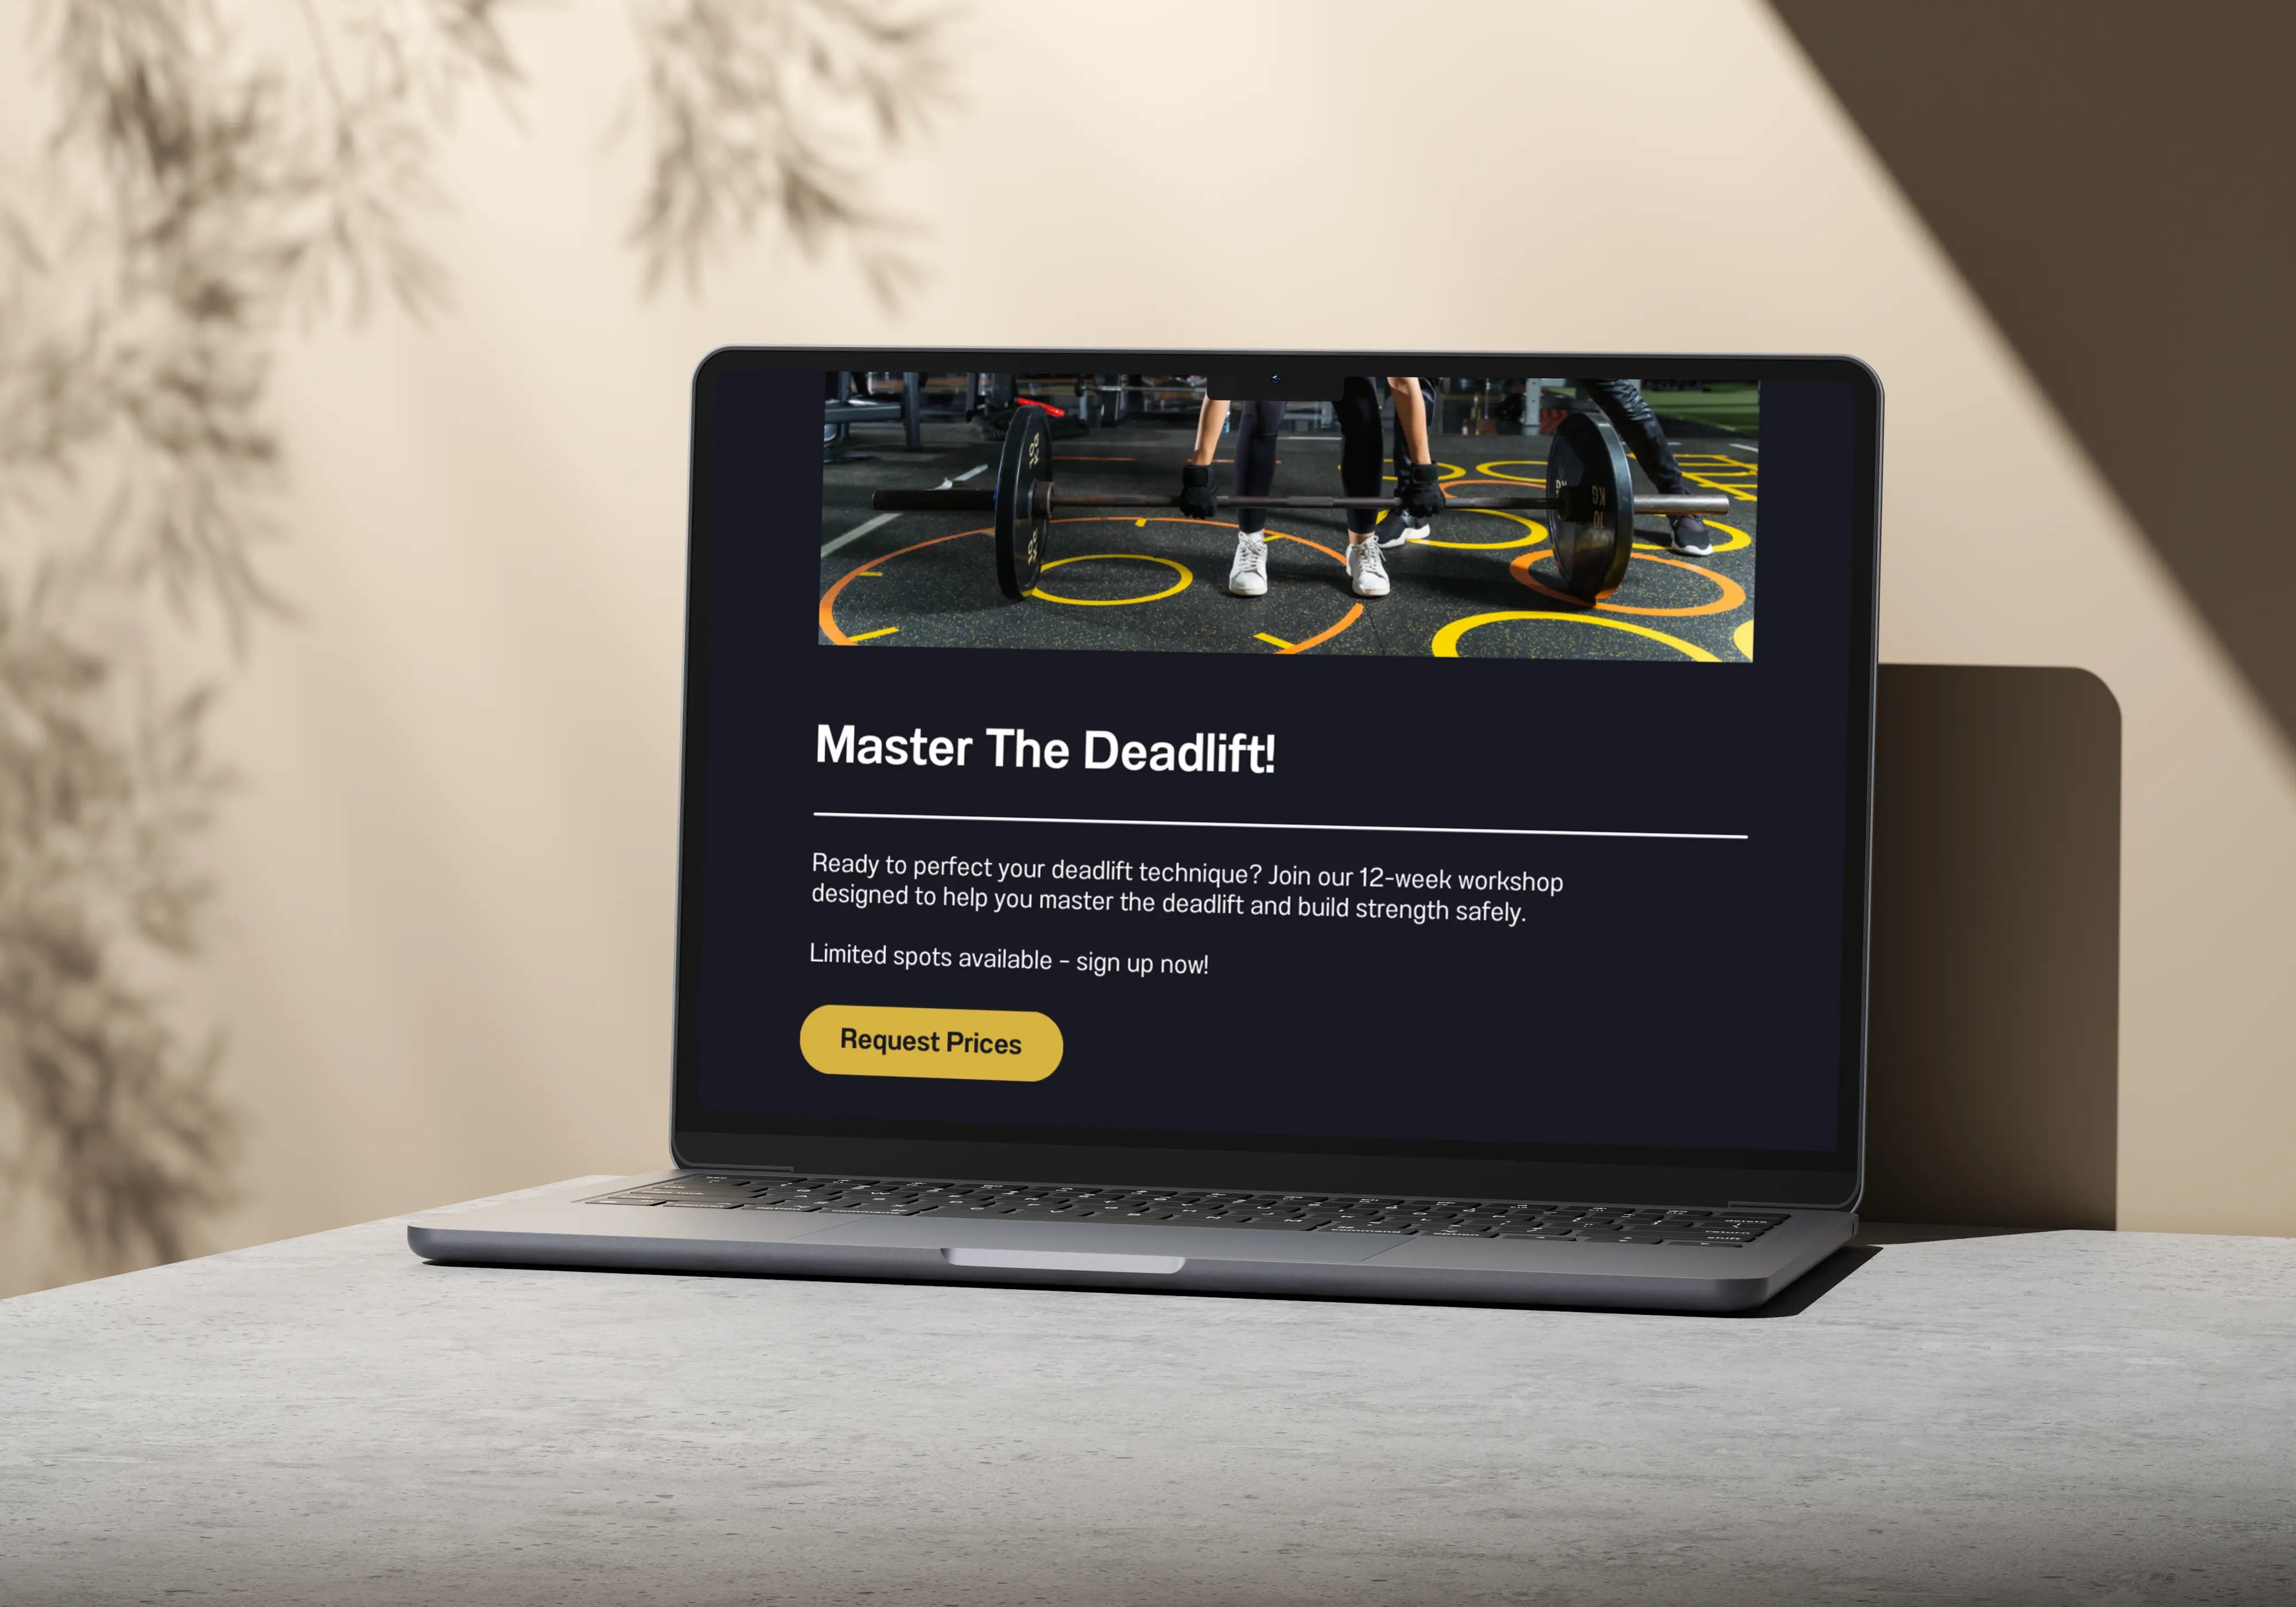 Laptop screen displaying an email marketing advertisement for a deadlift technique workshop focusing on health & fitness.